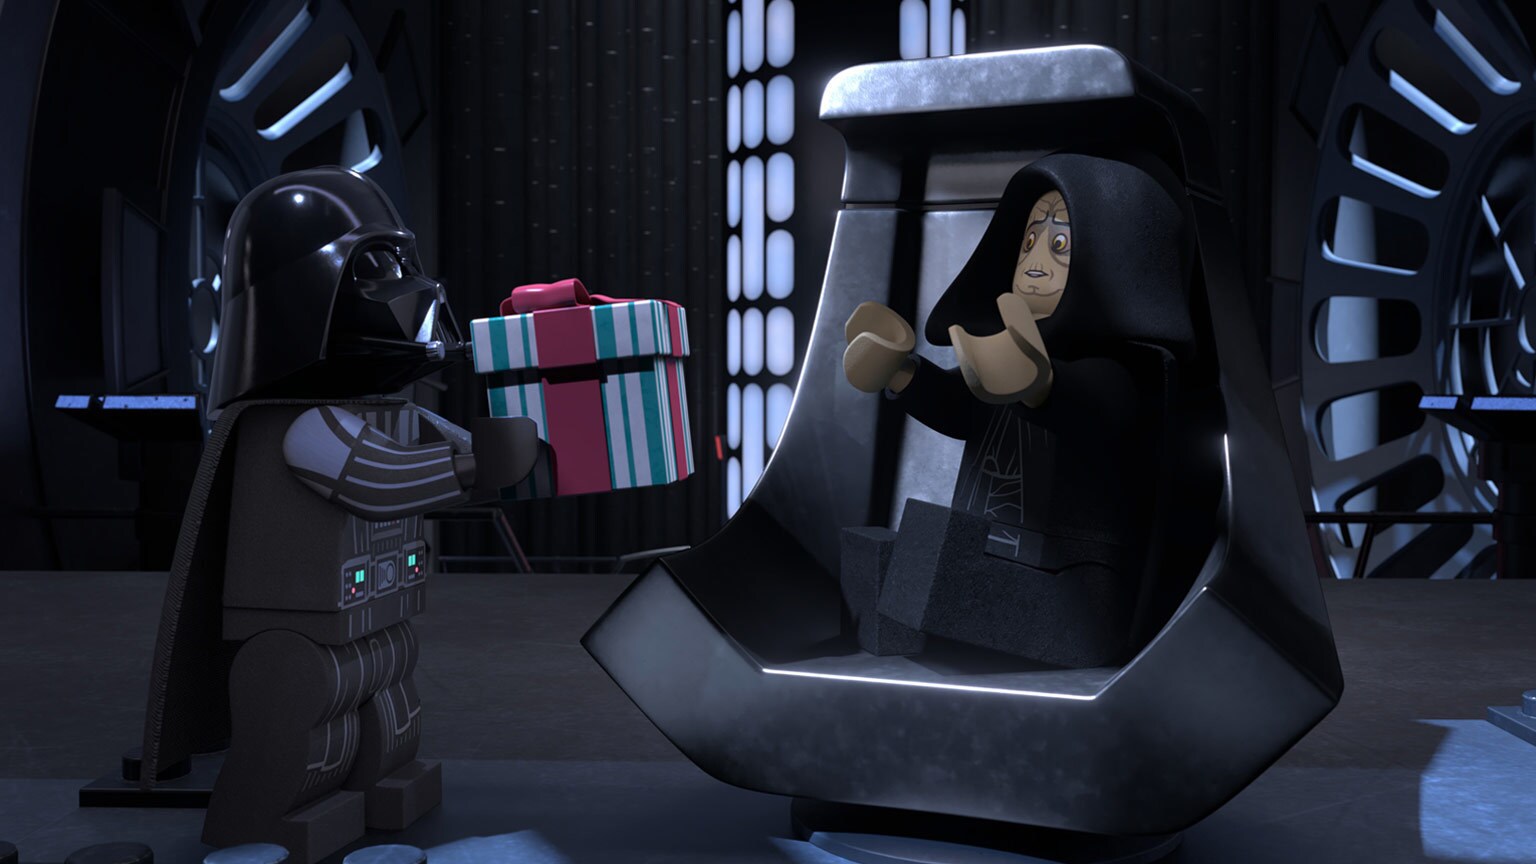 Darth Vader and Palpatine in A scene from the LEGO Star Wars Holiday Special